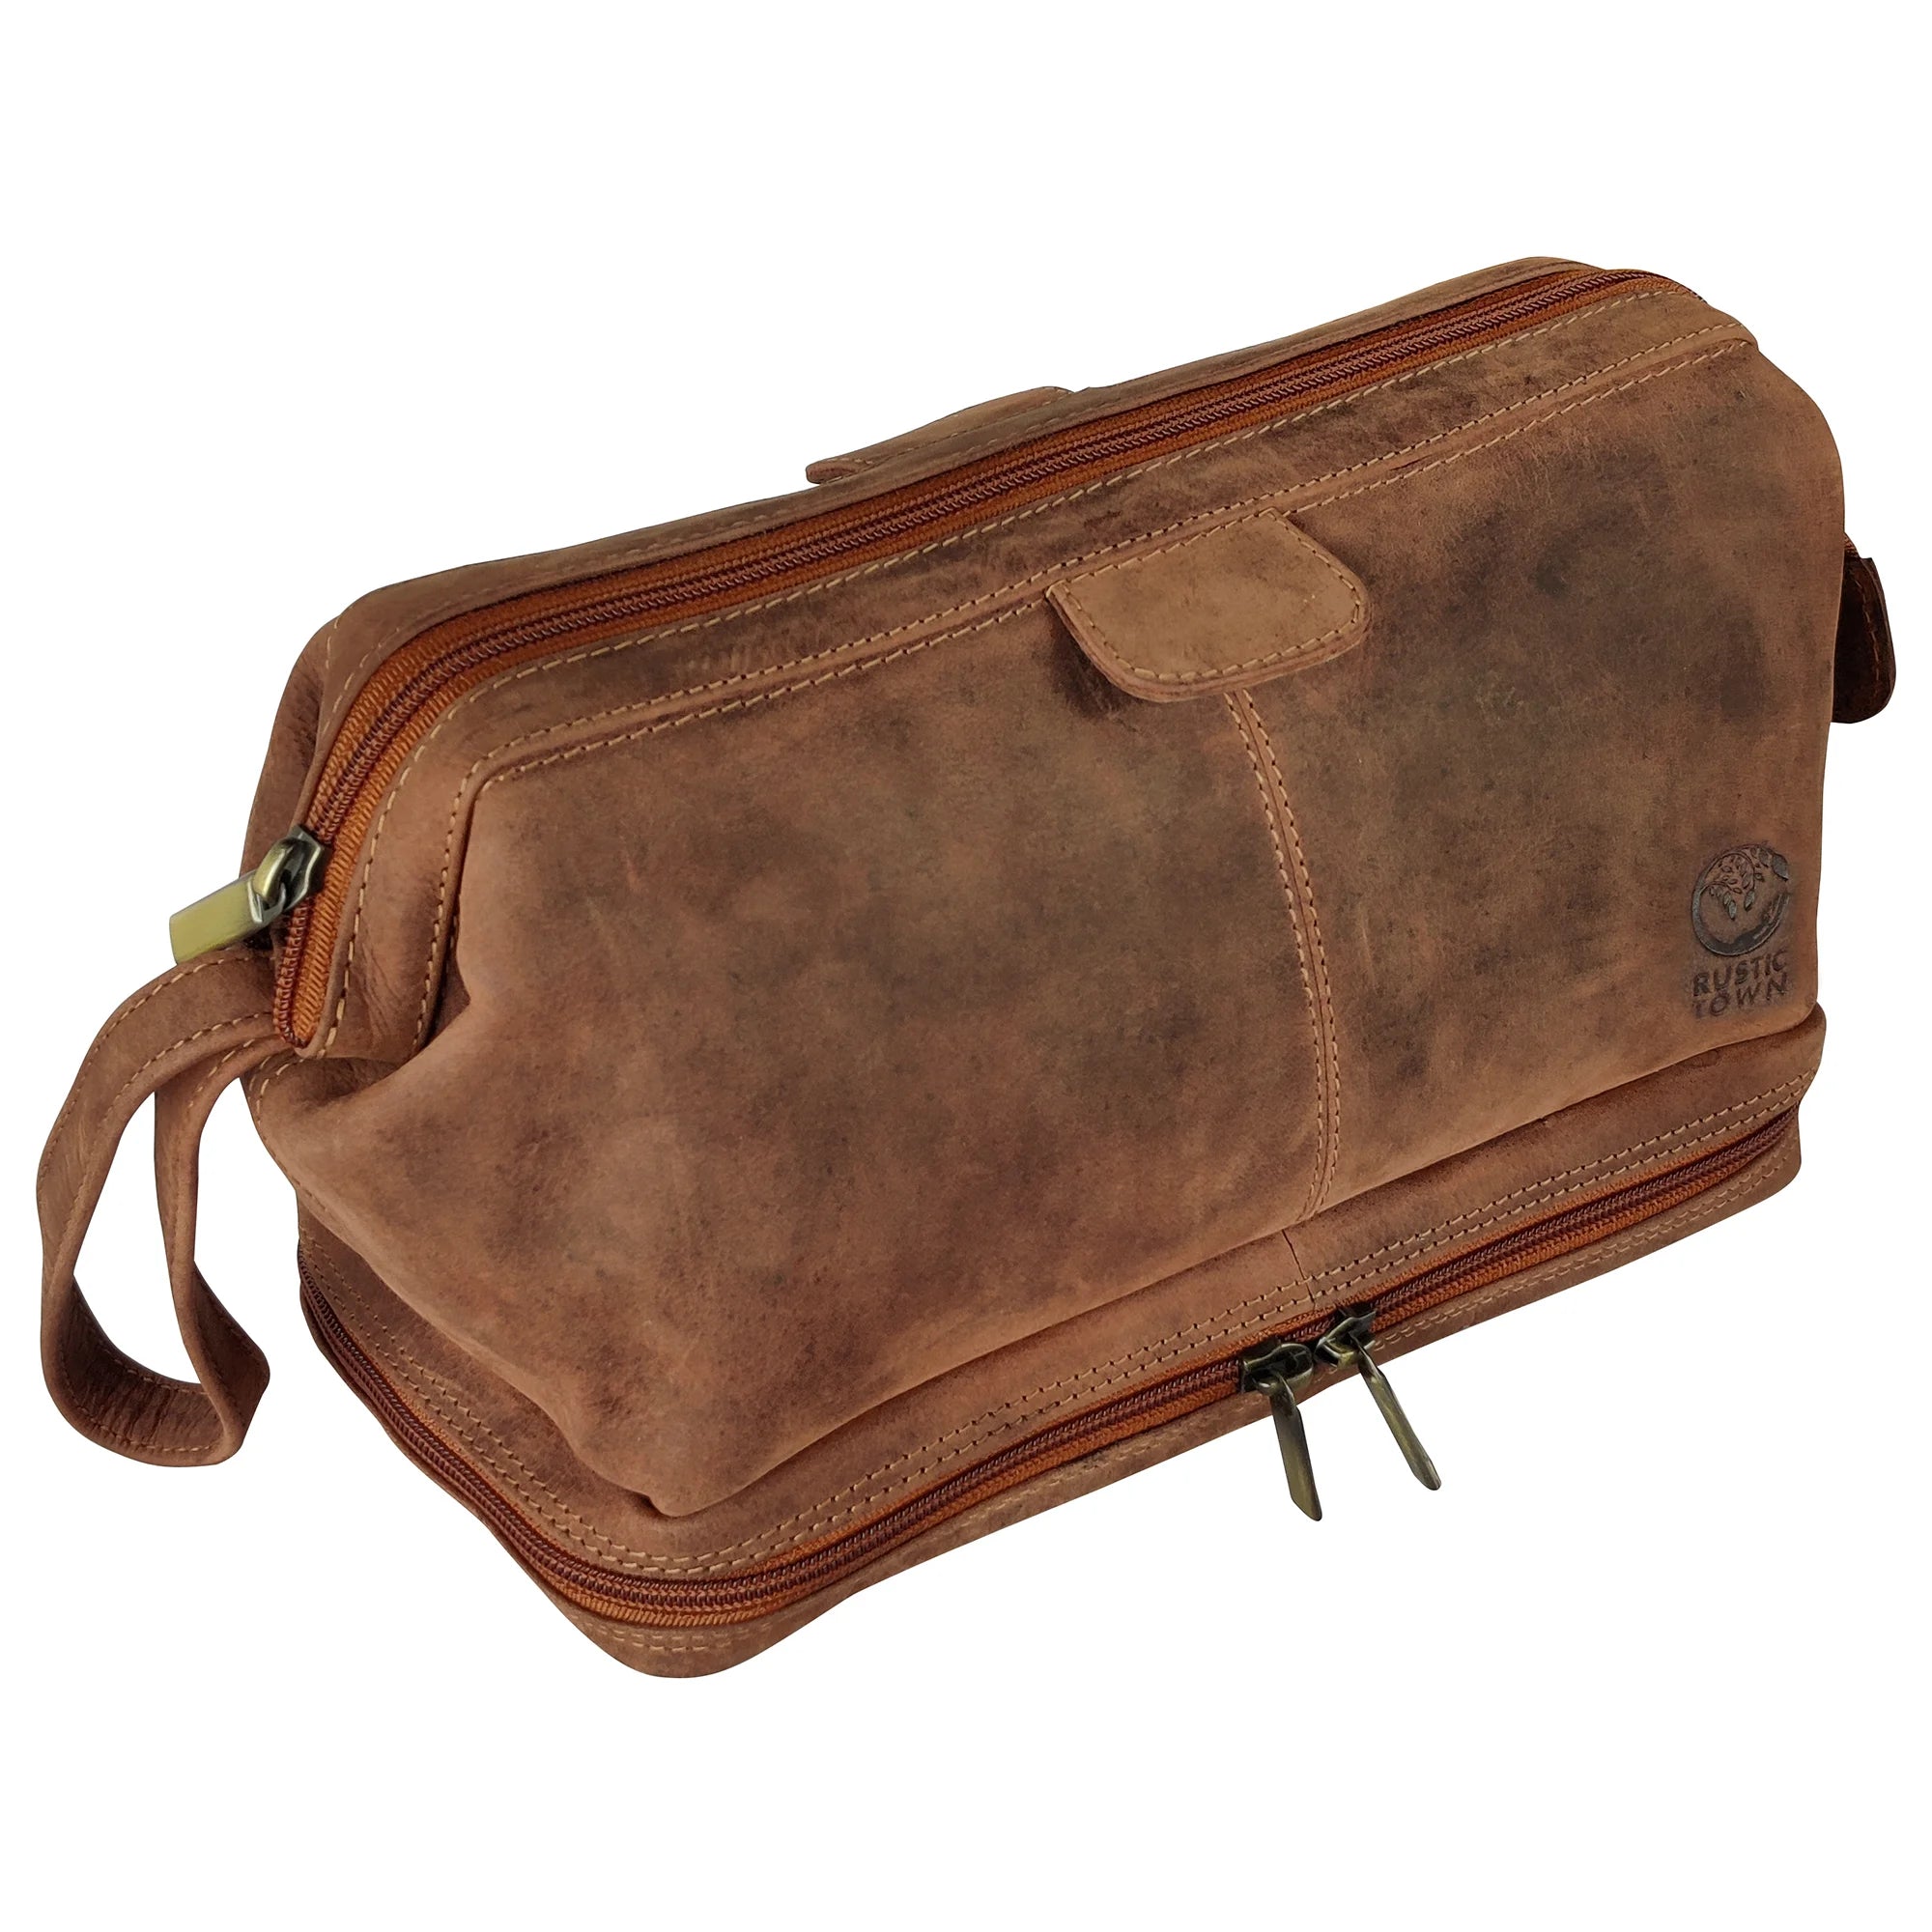 Rustico AC0196-0031 Soft Leather Toiletry Bag in Dark Brown